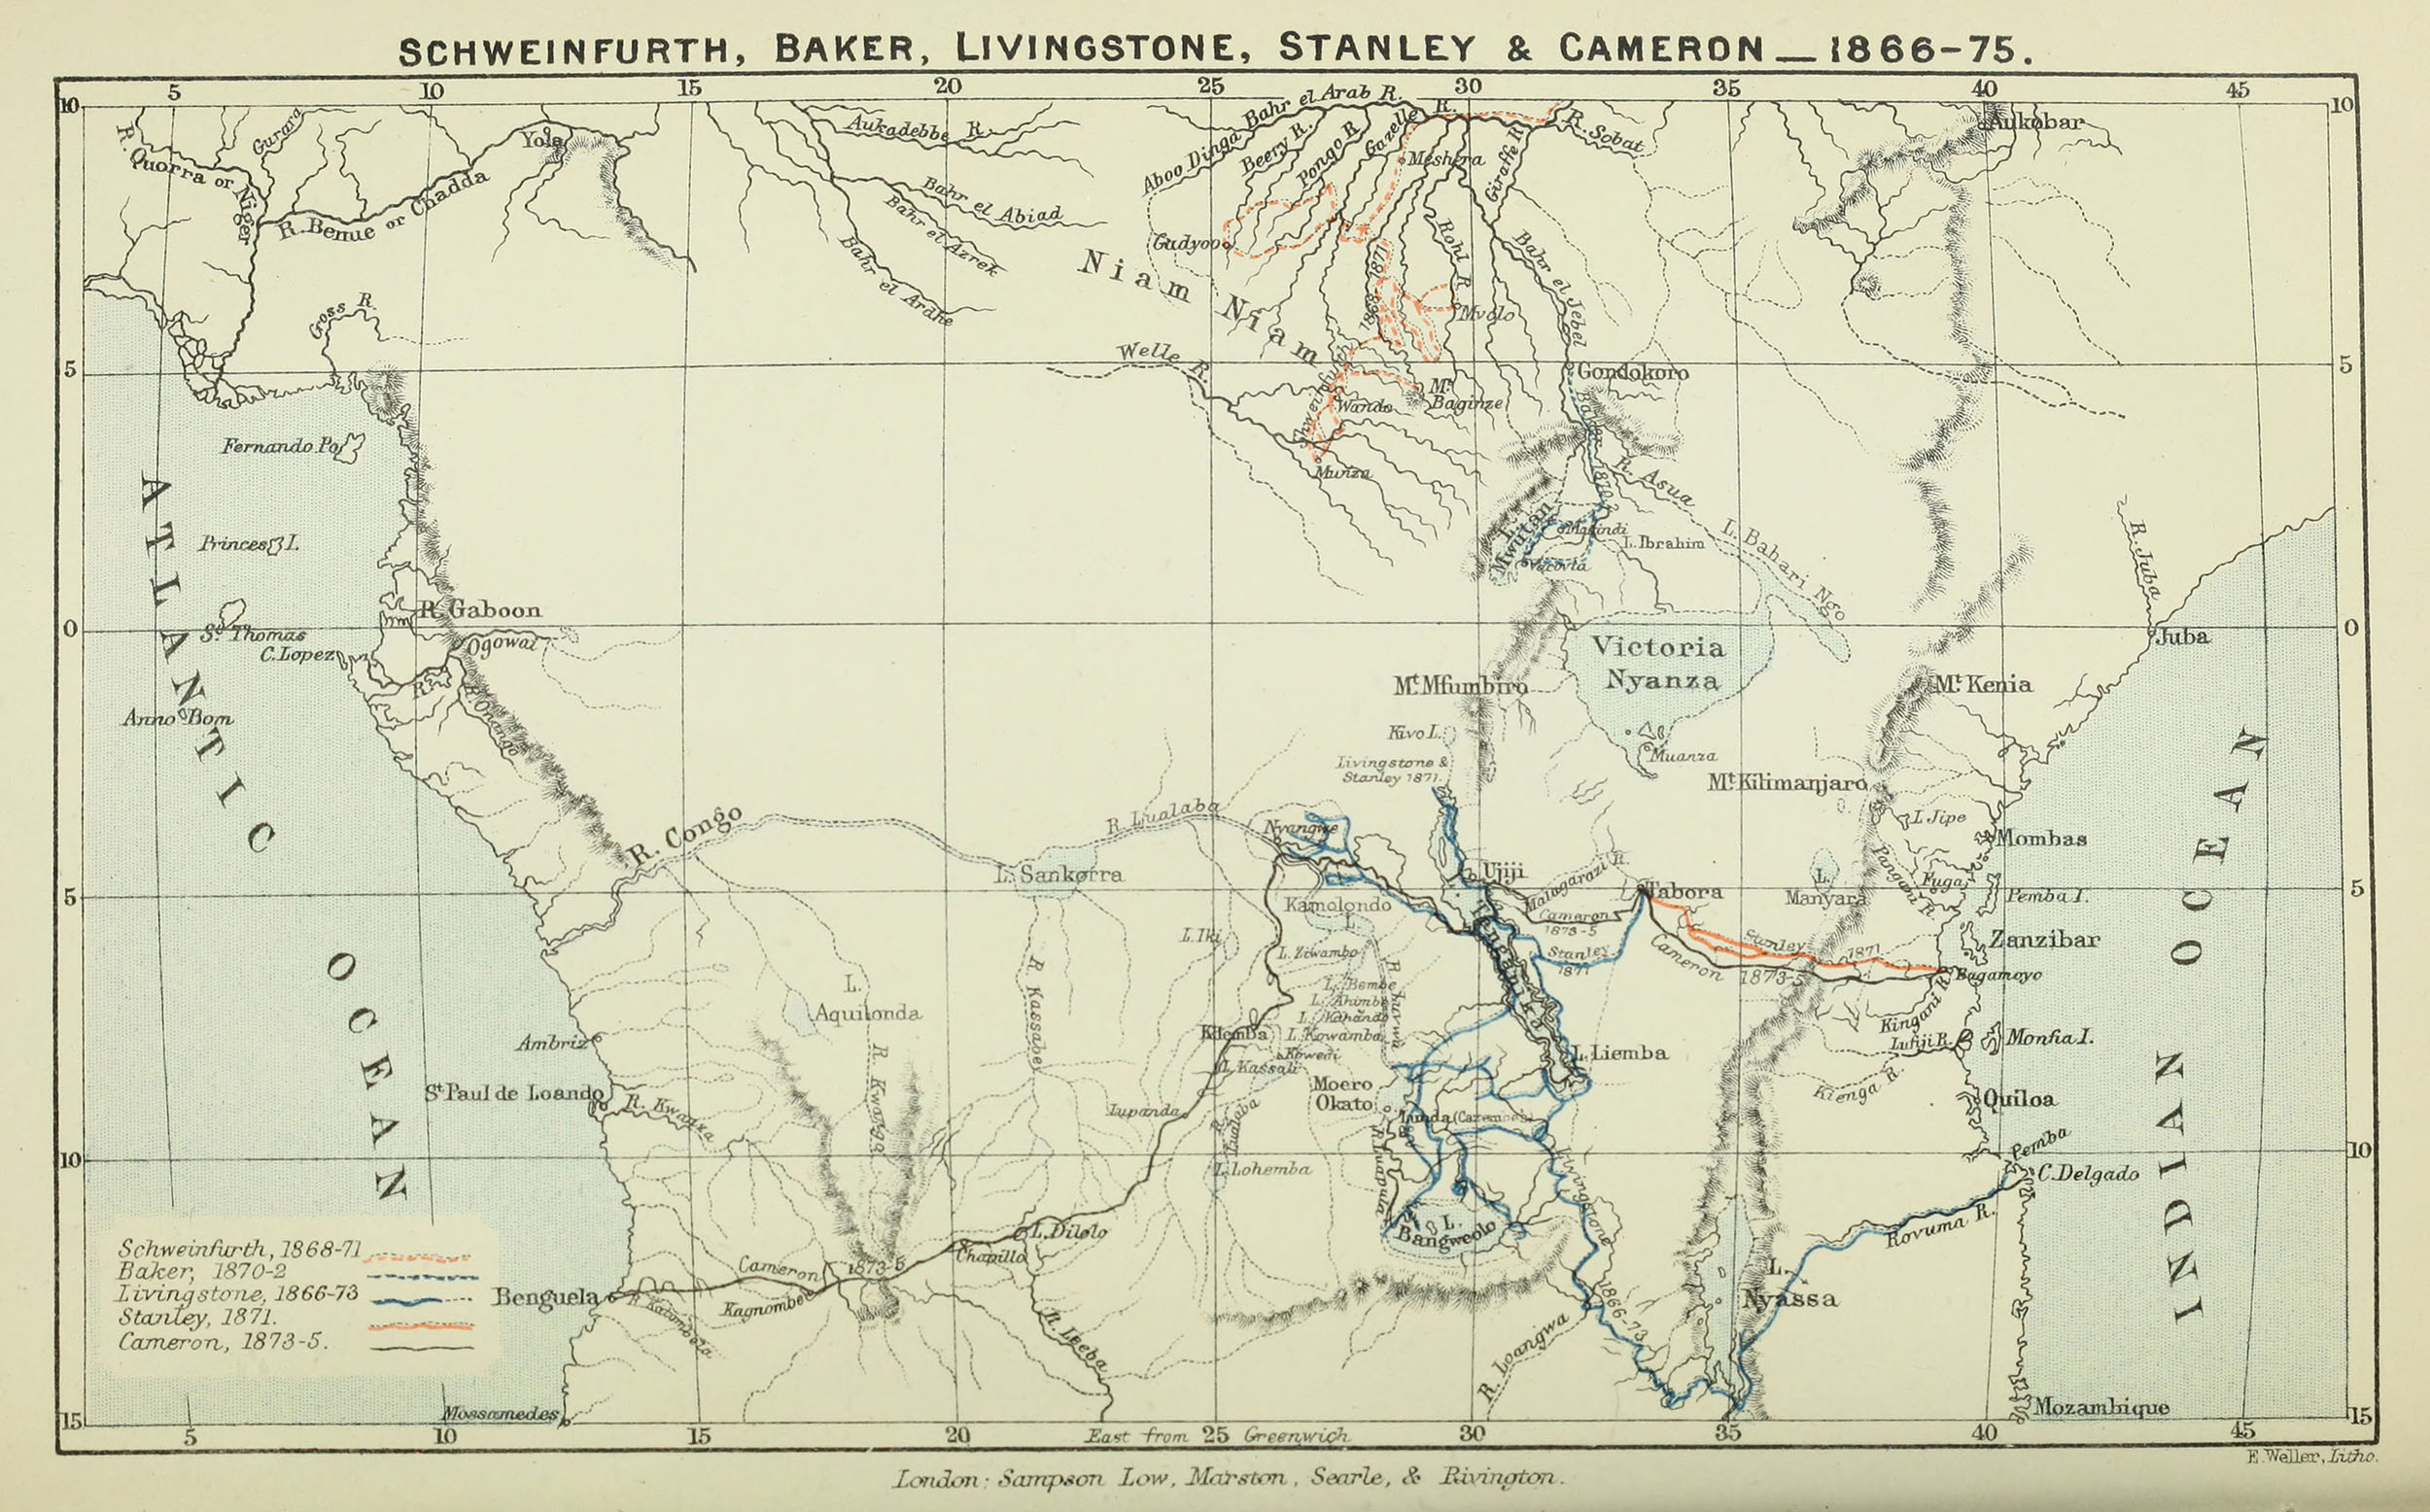 Schweinfurth, Baker, Livingstone, Stanley & Cameron _ 1866-1875. Map from Through the Dark Continent (Stanley 1878,1:n.p. Courtesy of Internet Archive.